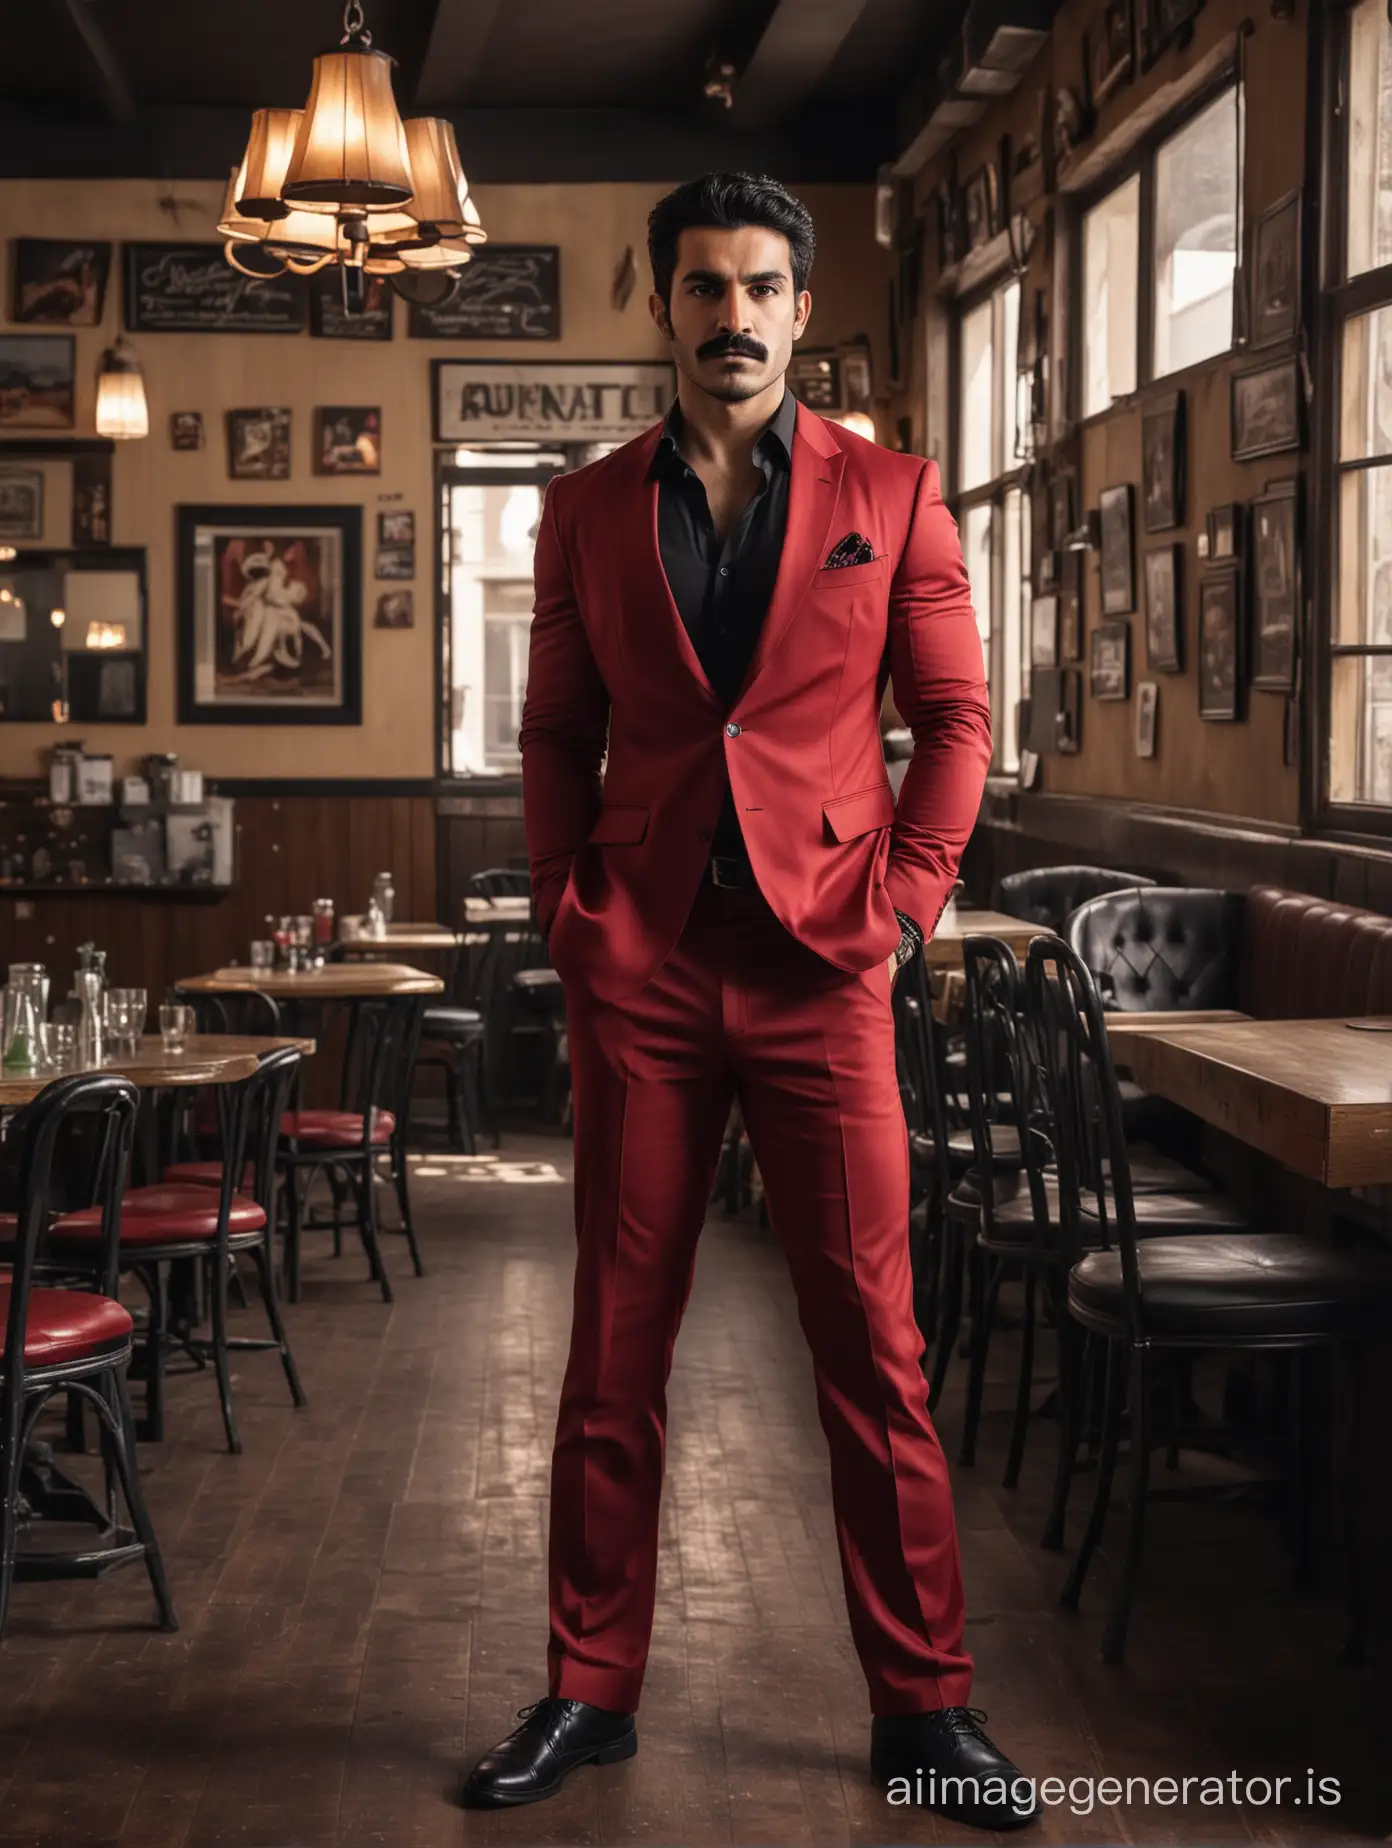 Angry-Iranian-Fitness-Man-in-Vintage-Restaurant